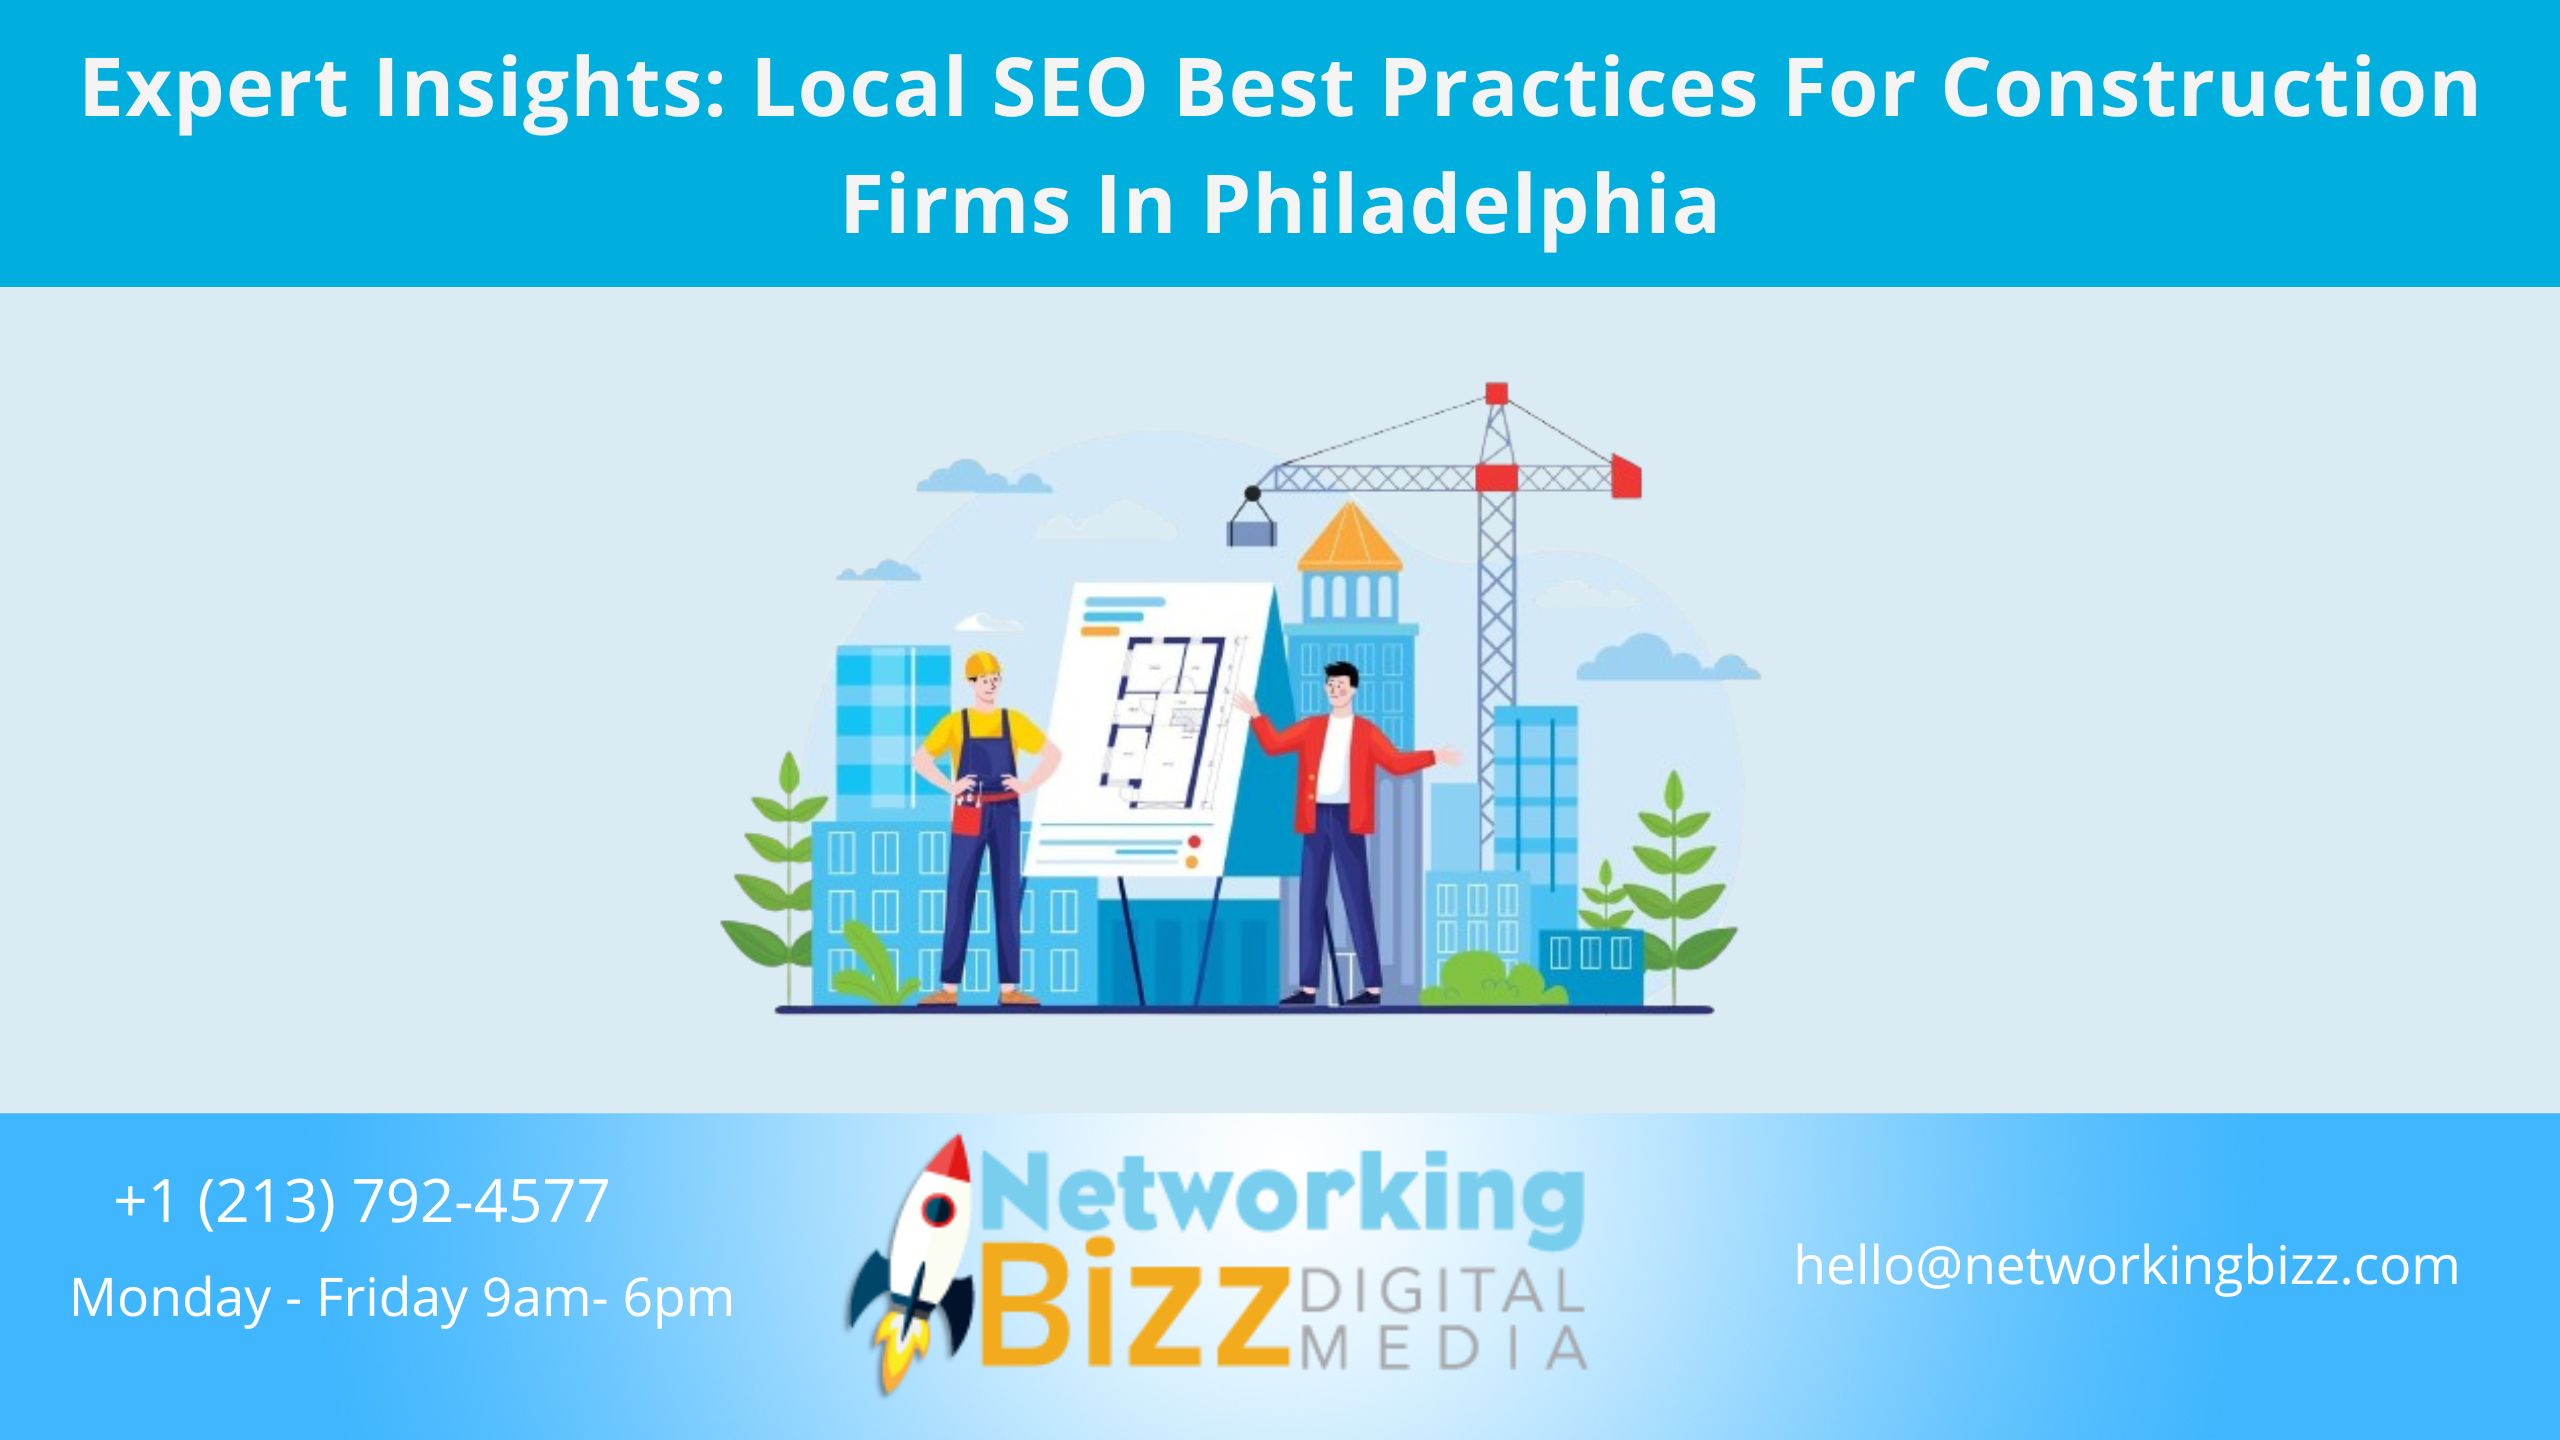 Expert Insights: Local SEO Best Practices For Construction Firms In Philadelphia